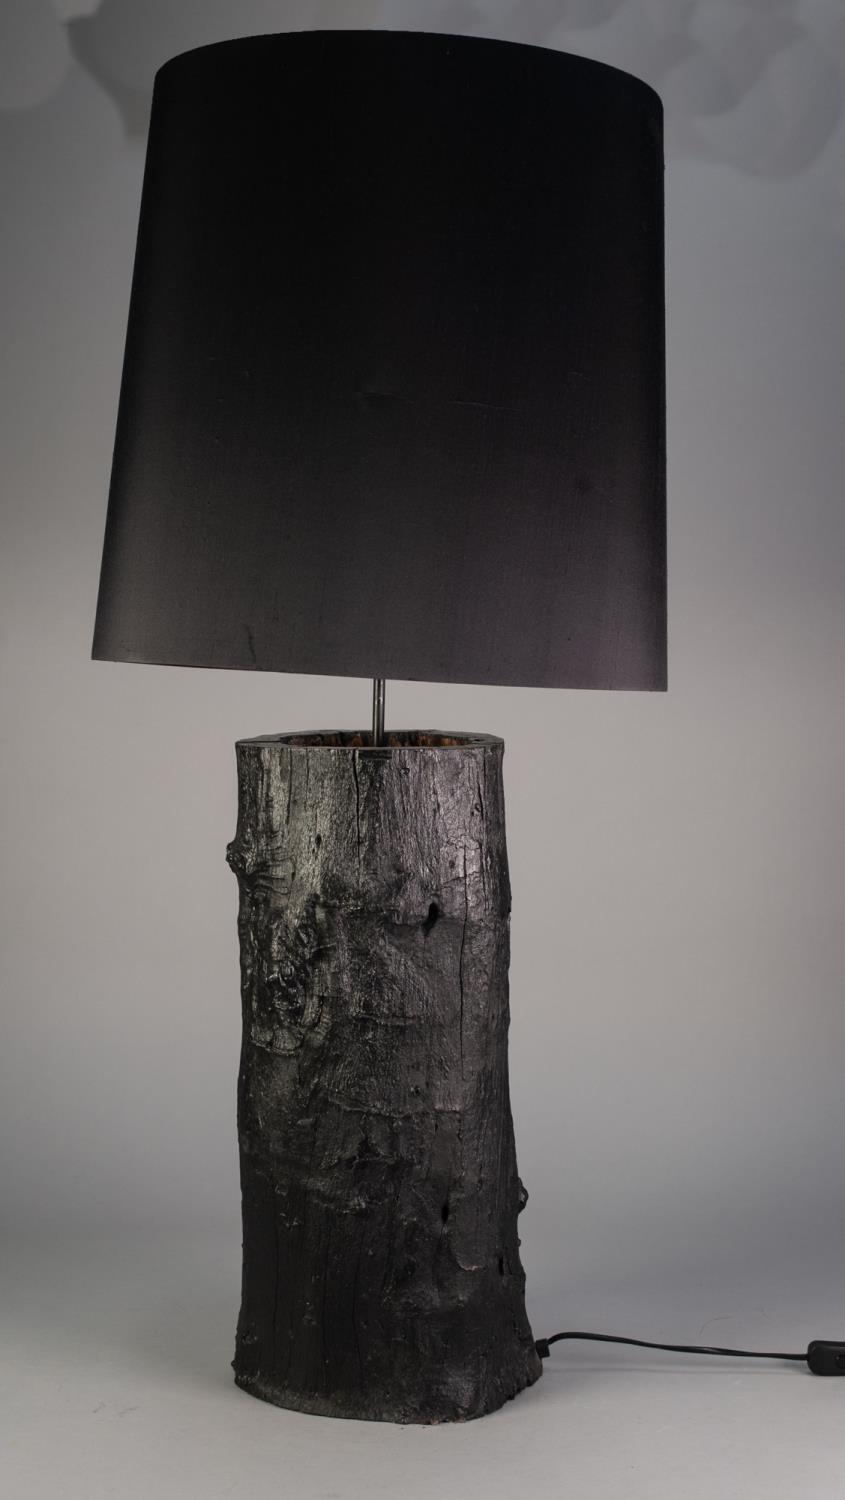 EICHHOLTZ, BLACK PAINTED TREE TRUNK TABLE LAMP, and the black fabric shade, 41" (104.1cm) high,